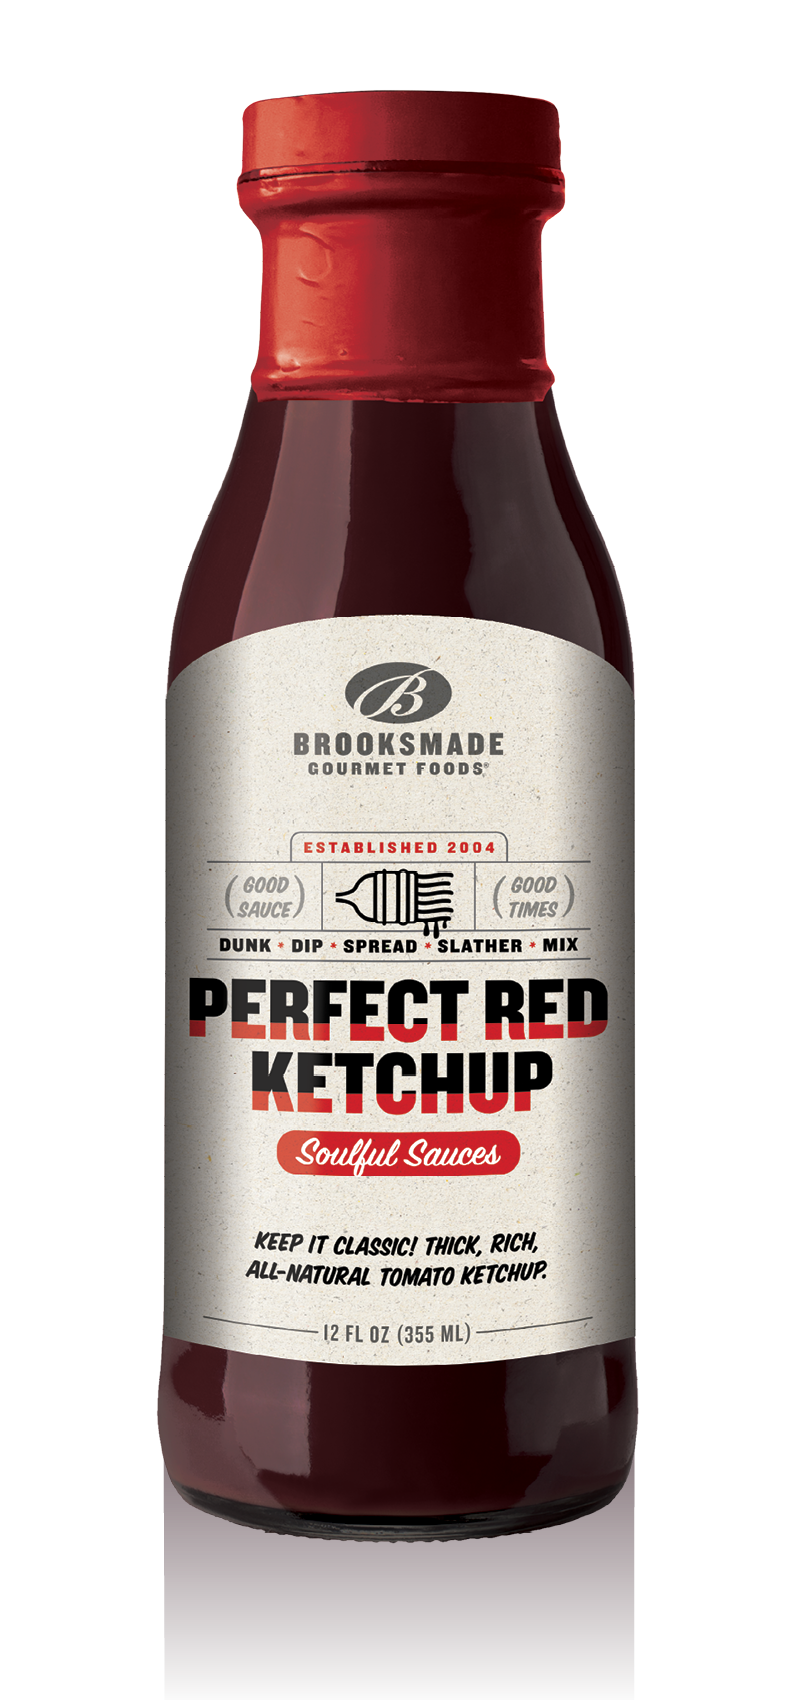 Perfect Red Ketchup, Gluten Free, No High Fructose Corn Syrup All-Natural Ketchup, Made with Organic Tomatoes, 12 oz Unit